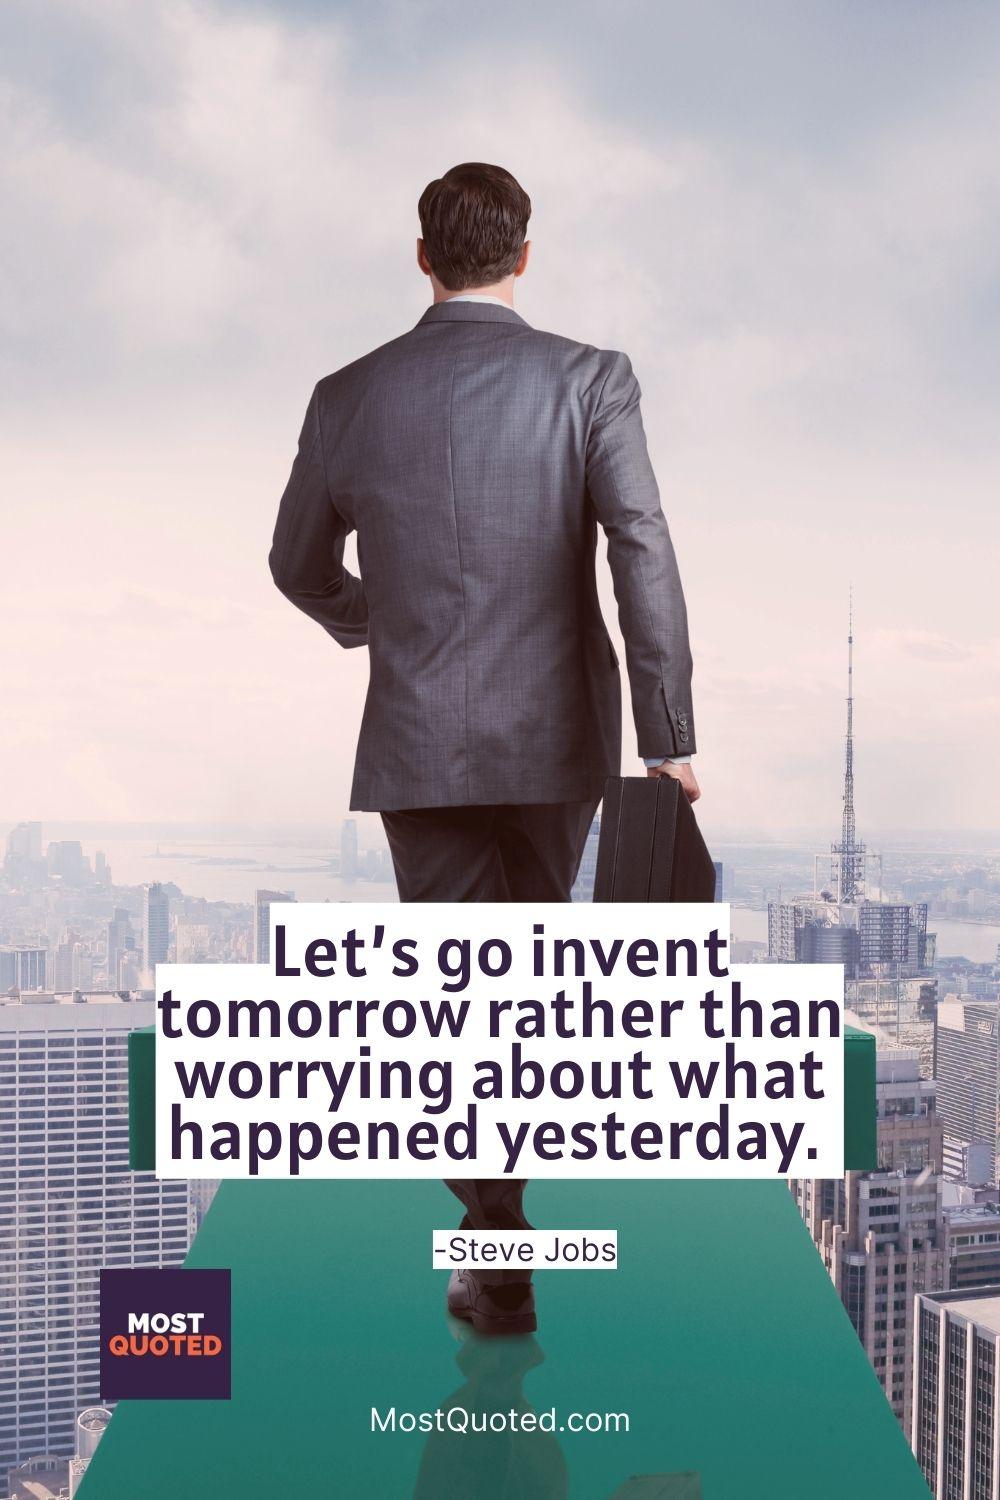 Let’s go invent tomorrow rather than worrying about what happened yesterday. - Steve Jobs